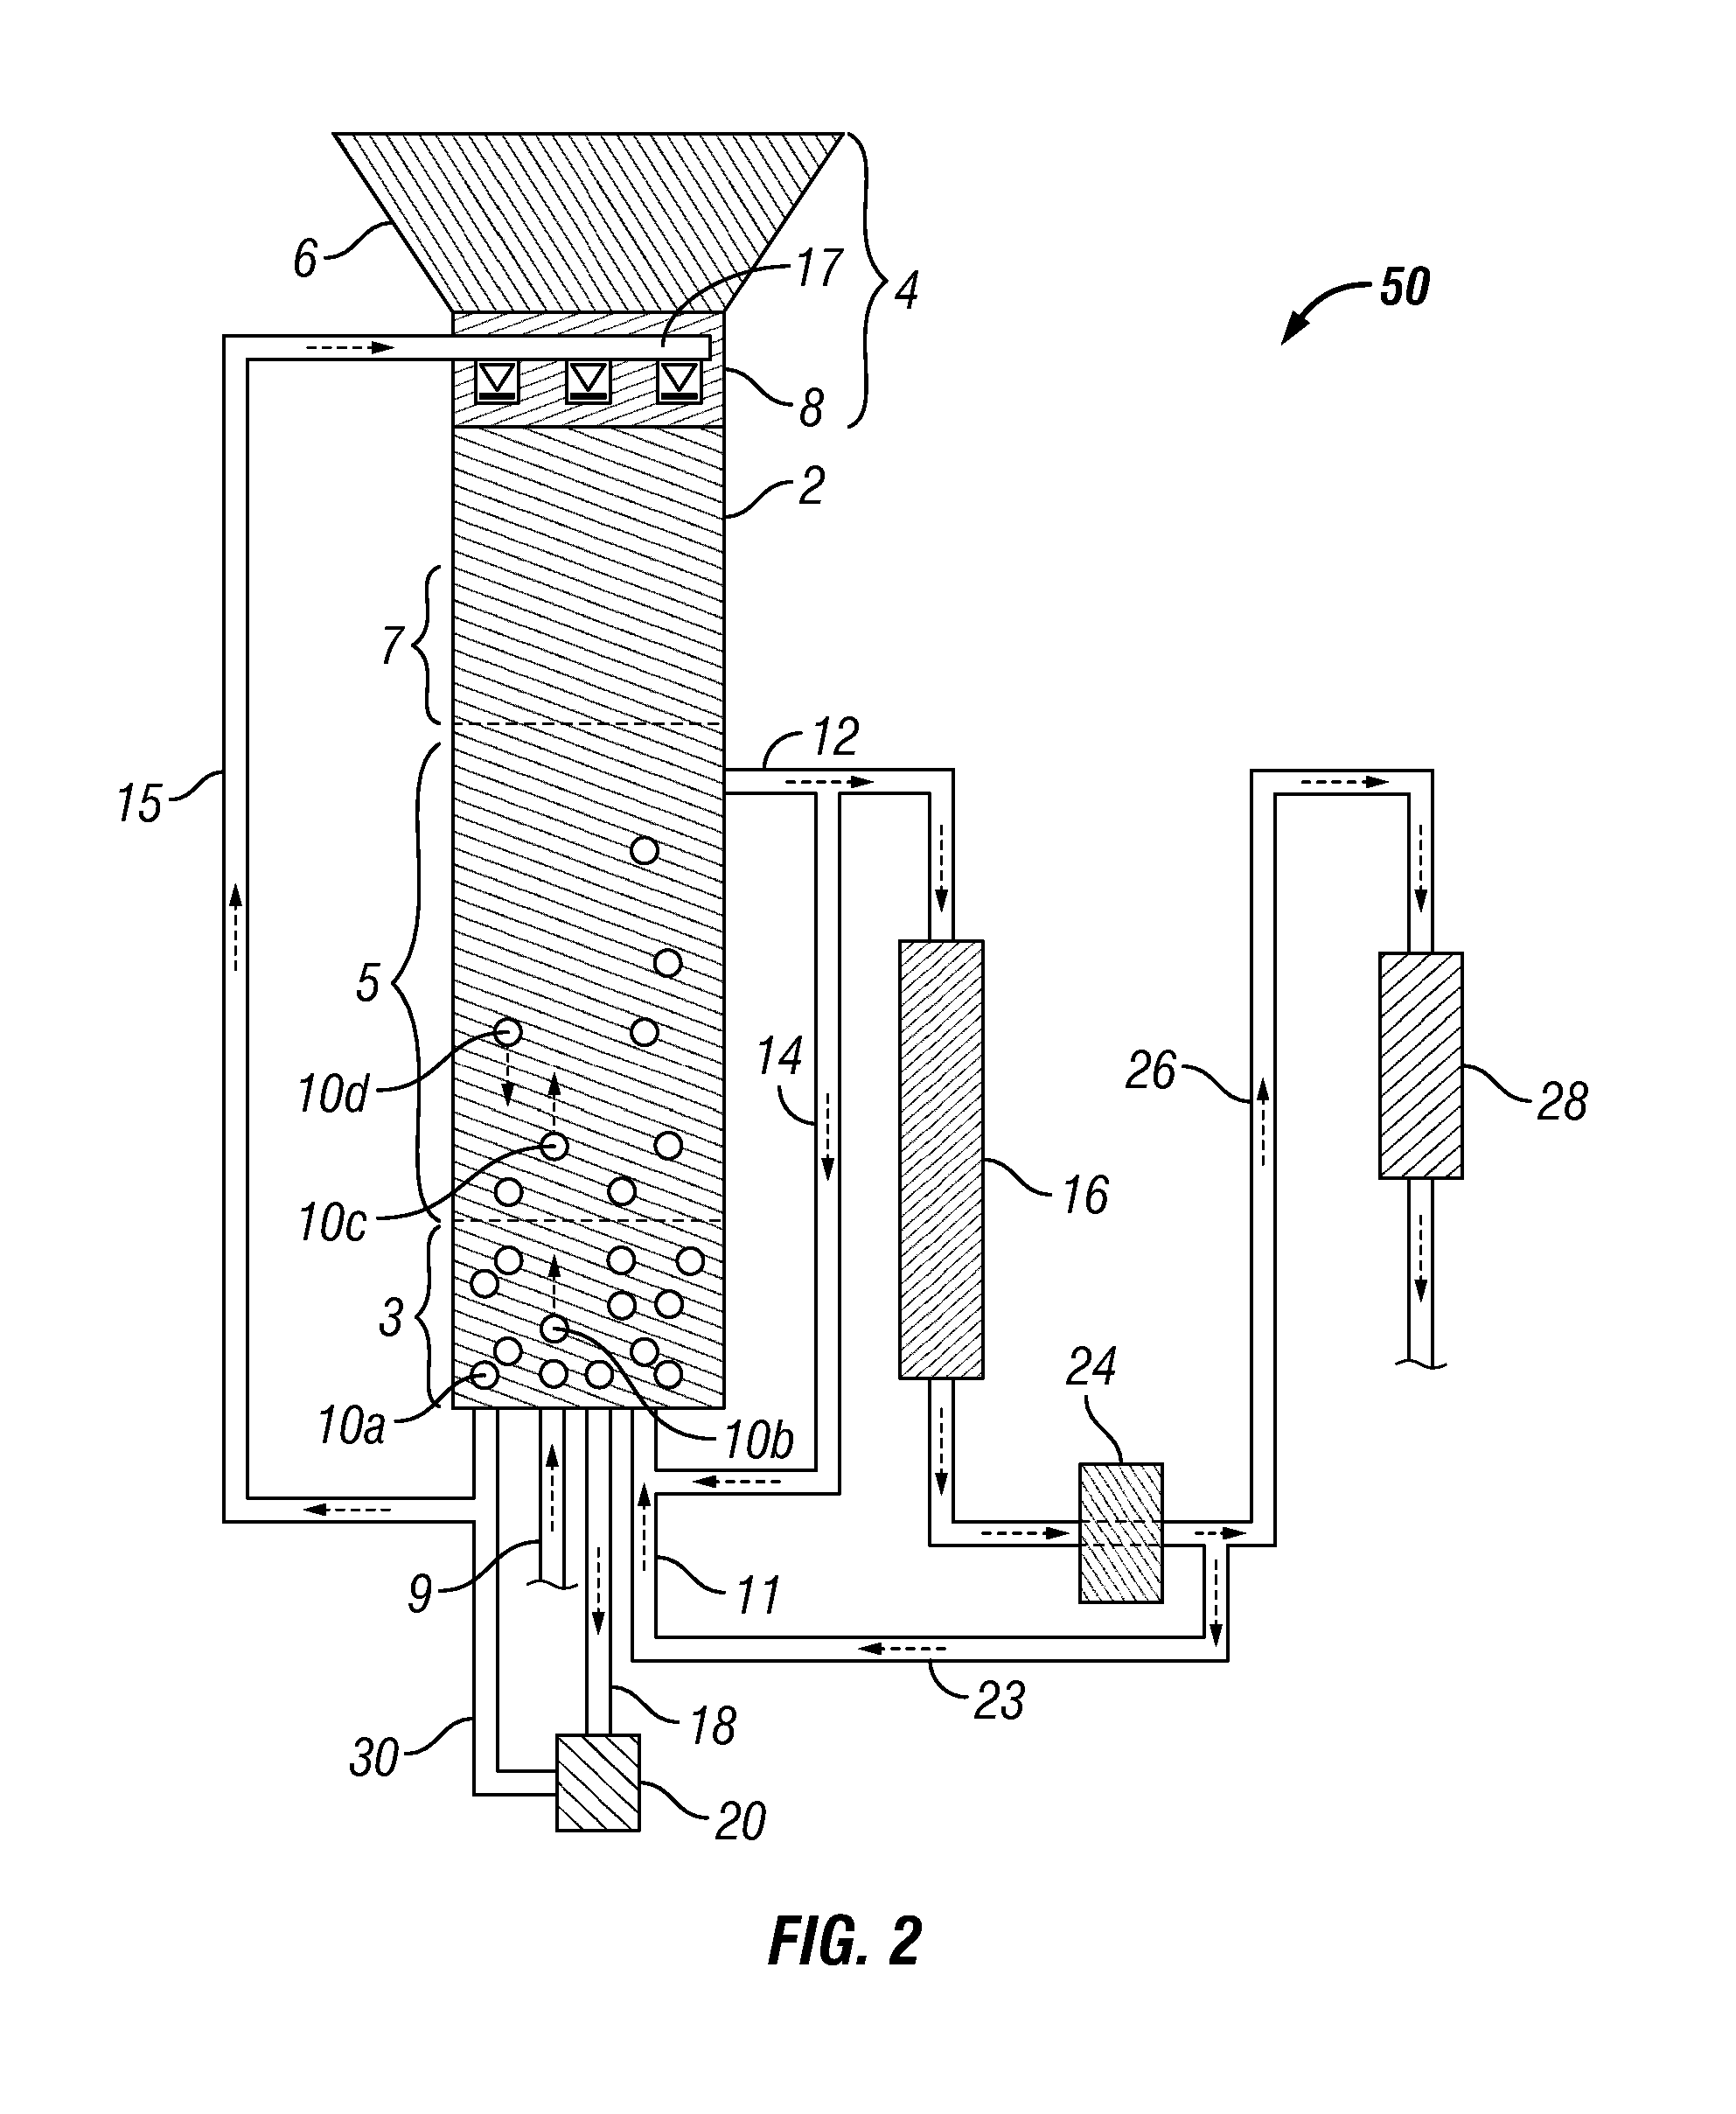 Methods and systems for distributing a slurry catalyst in cellulosic biomass solids